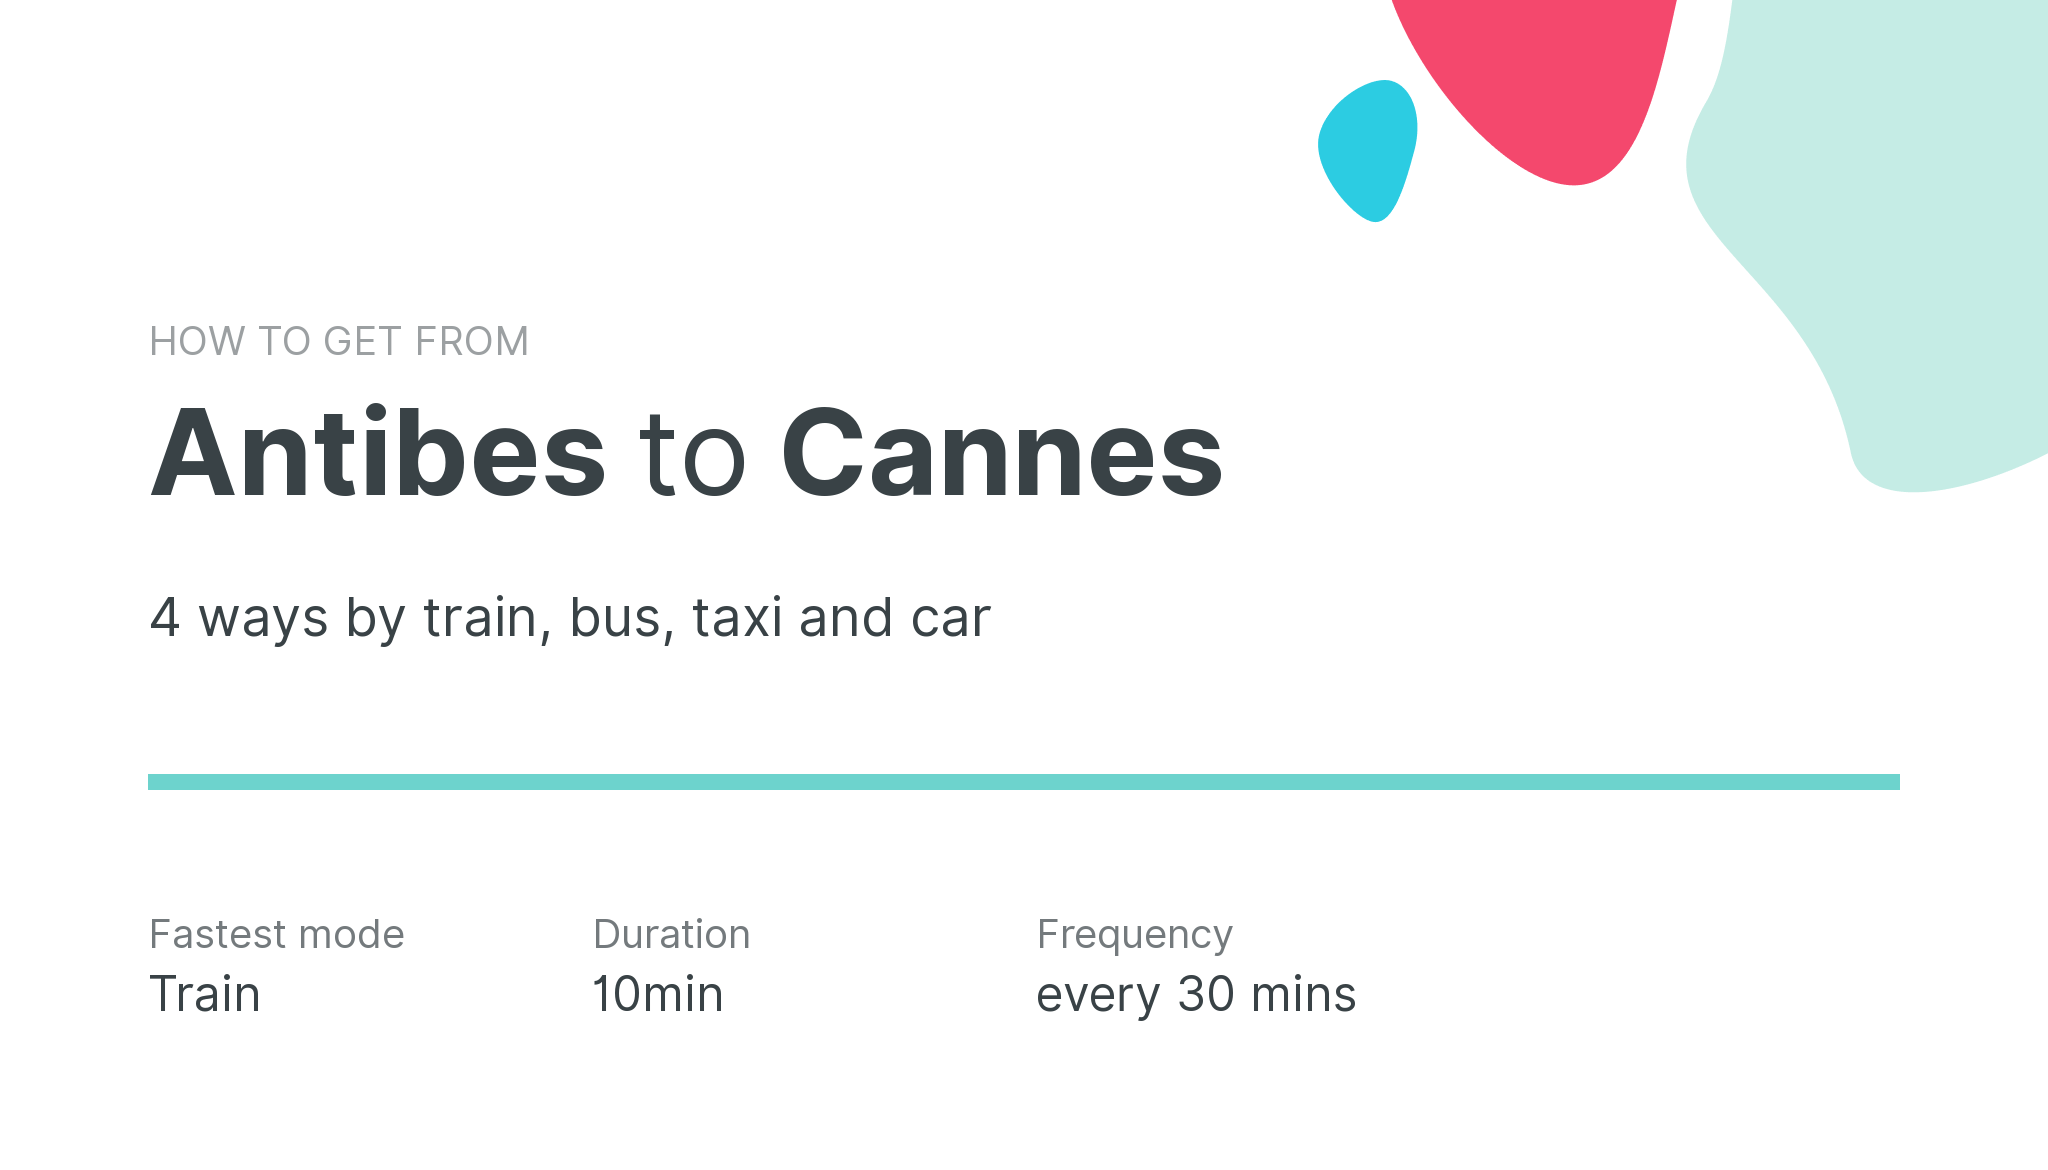 How do I get from Antibes to Cannes